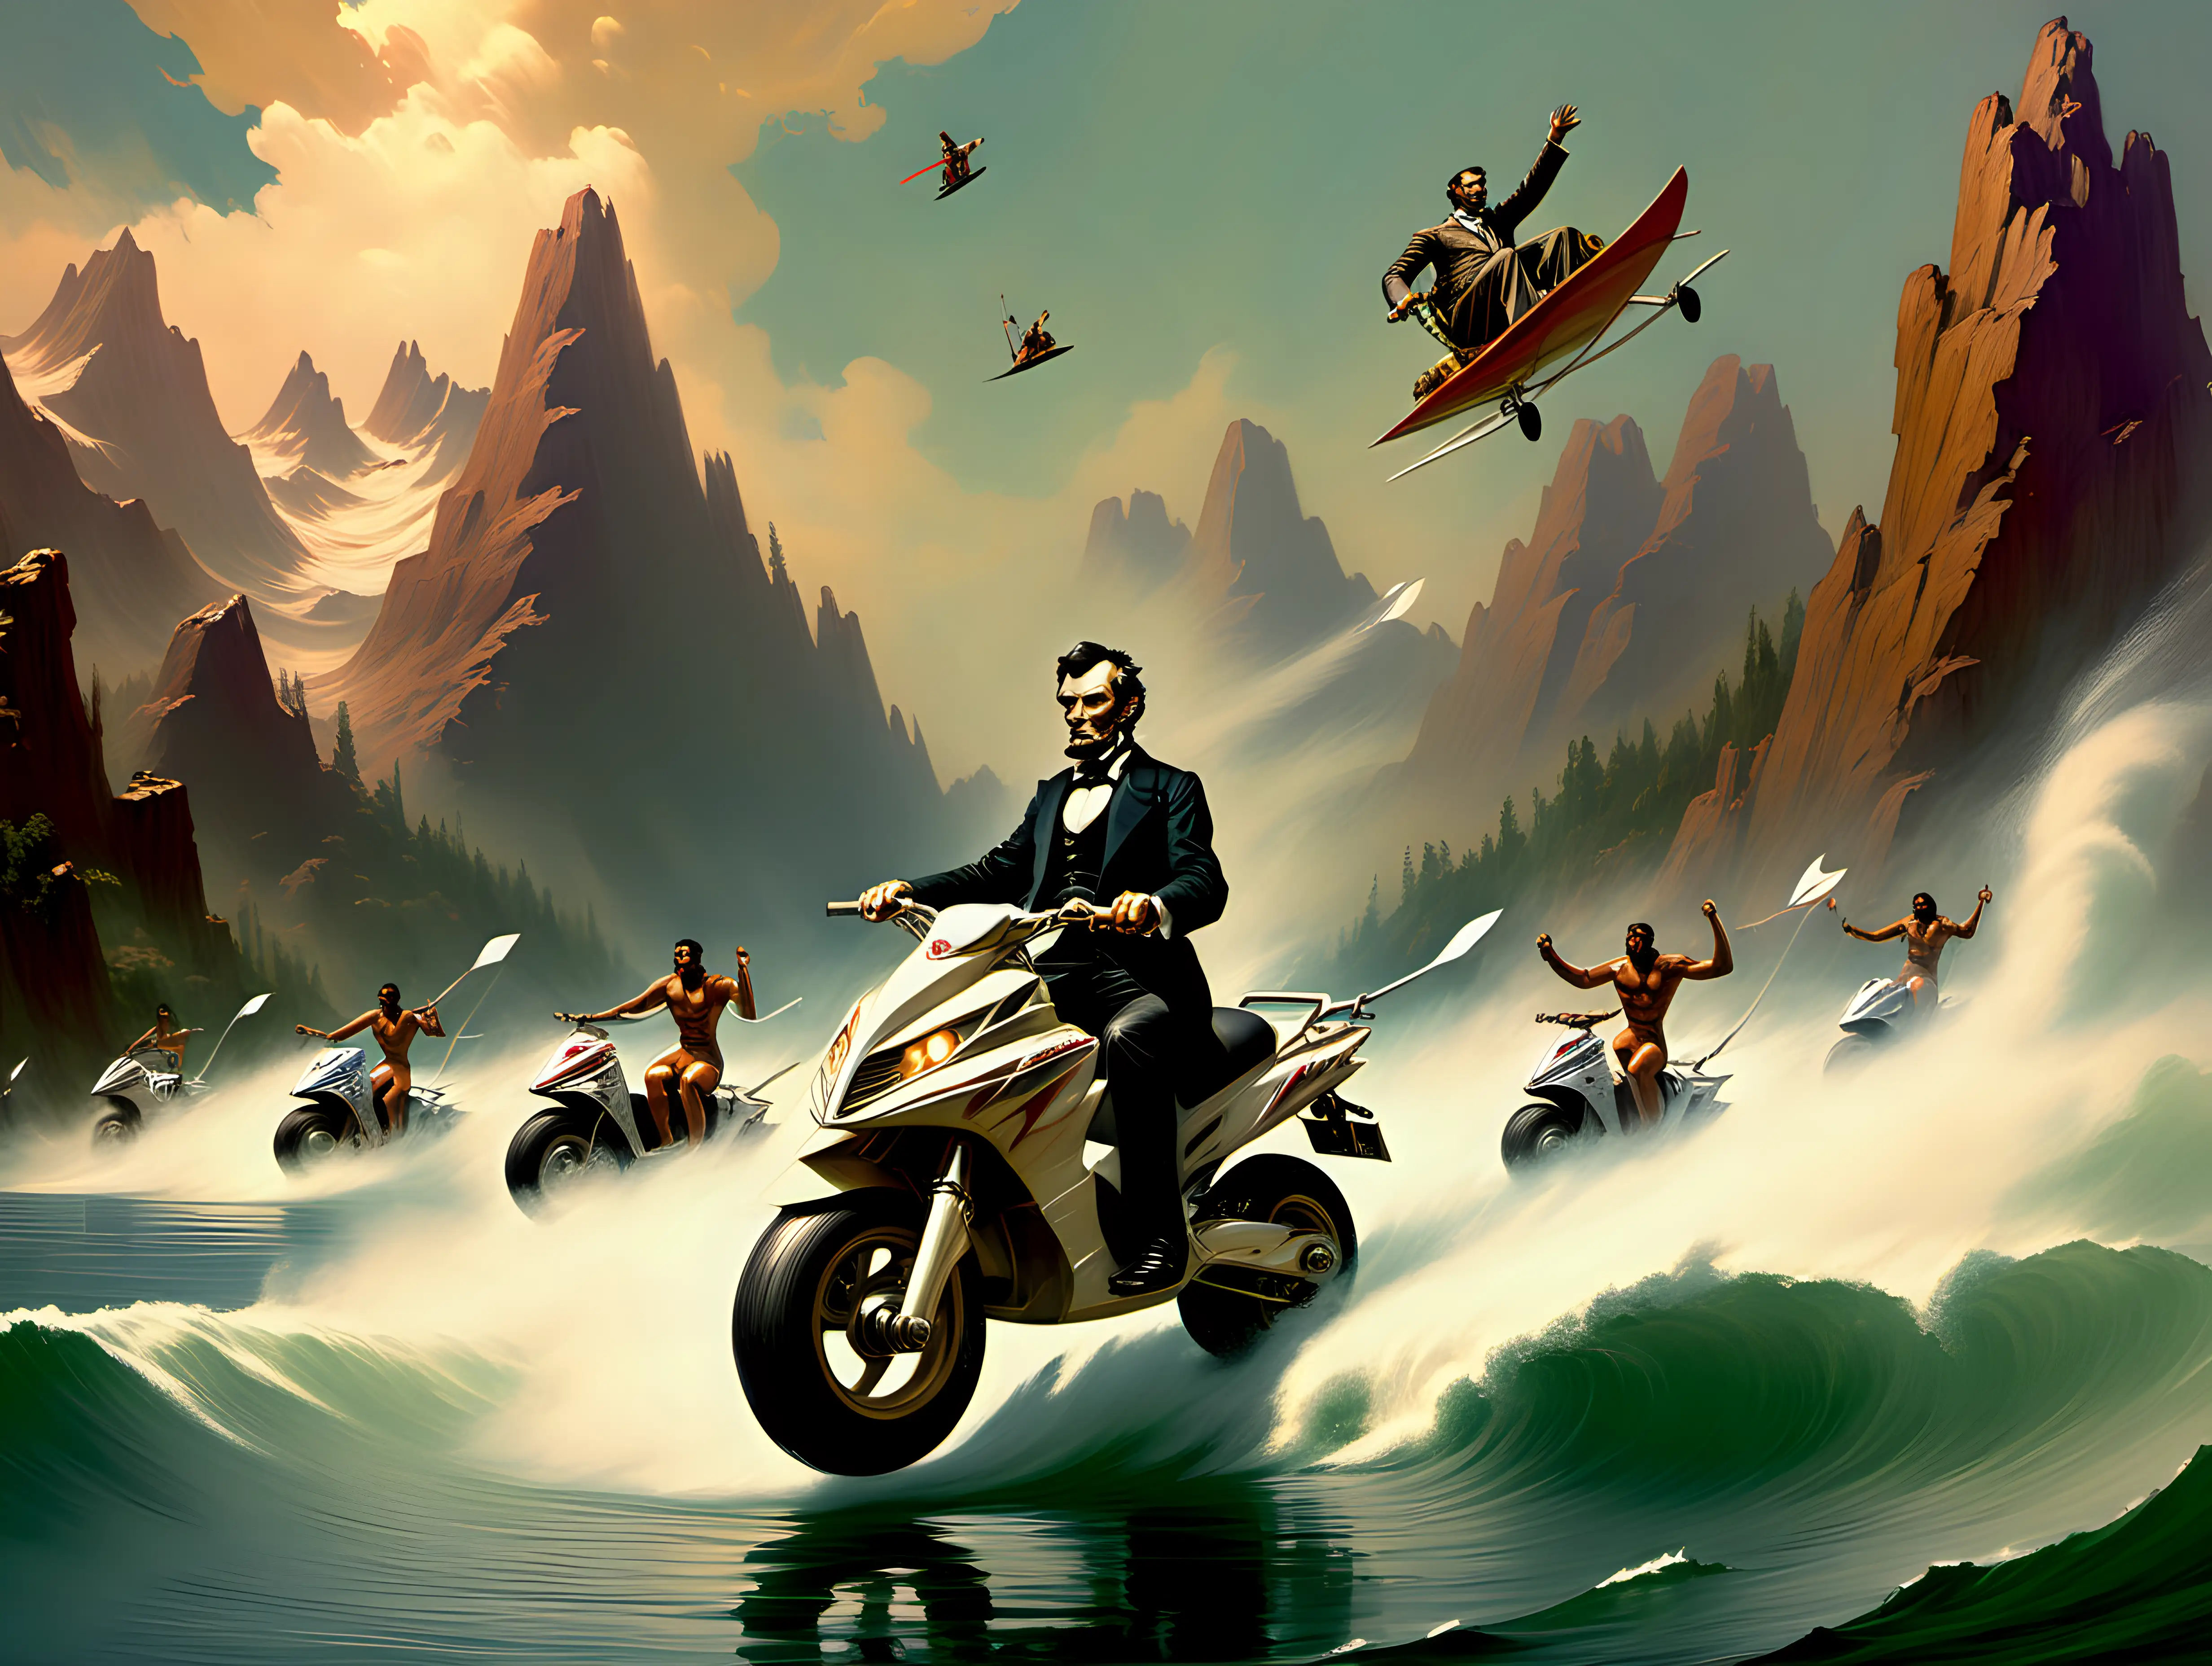 Abraham Lincoln Jet Ski Escape from Wind Surfing Ogres amid Majestic Mountains